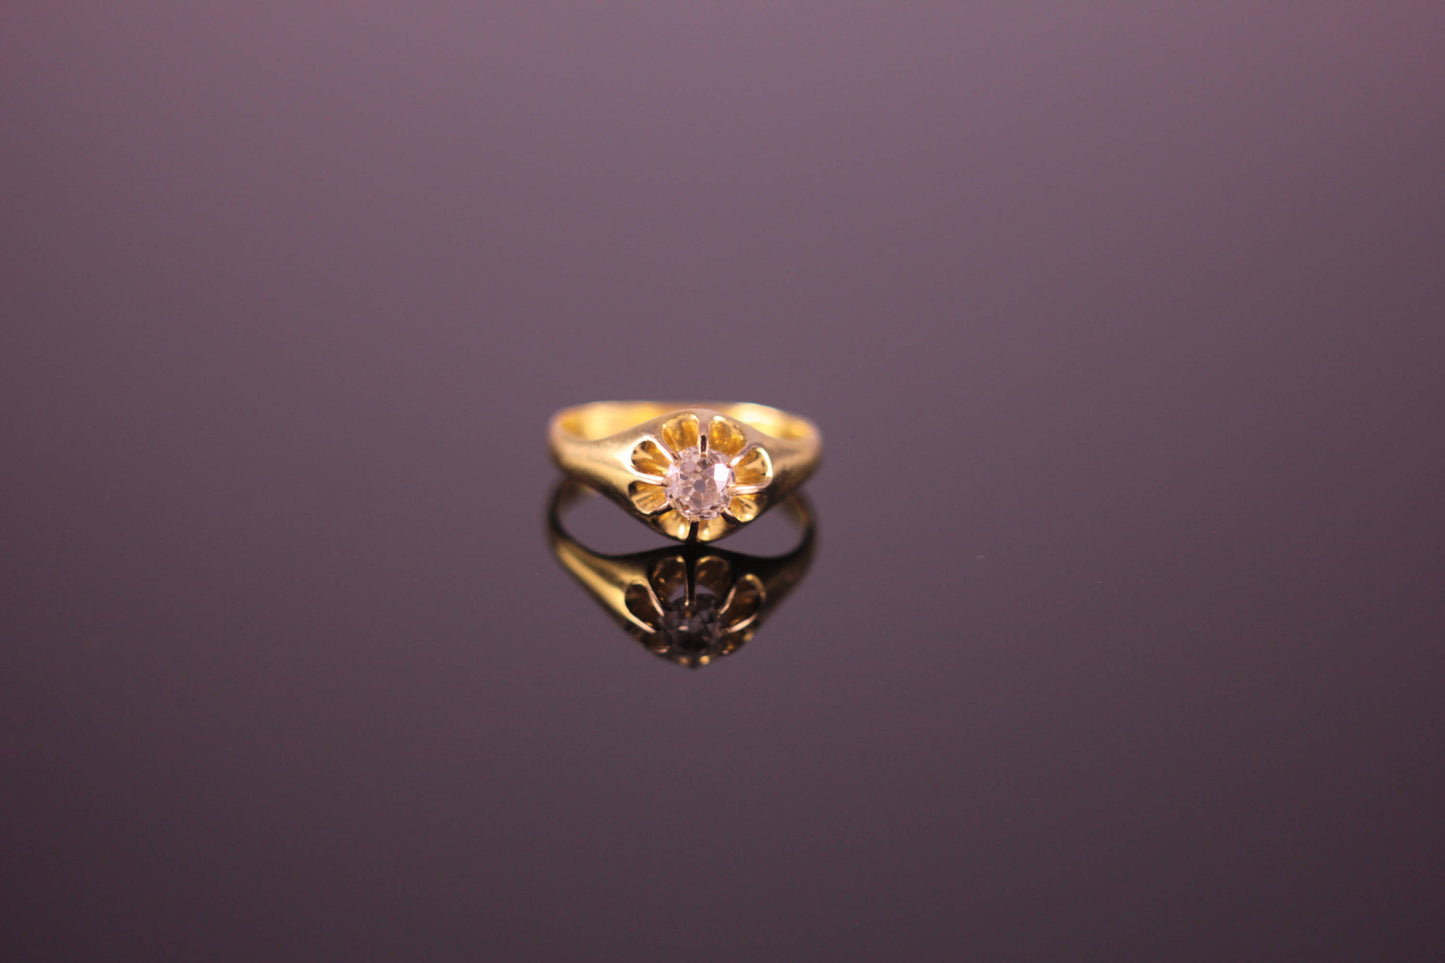 Antique Victorian 0.50ct Antique Old Cut Diamond Ring in 18ct Yellow Gold